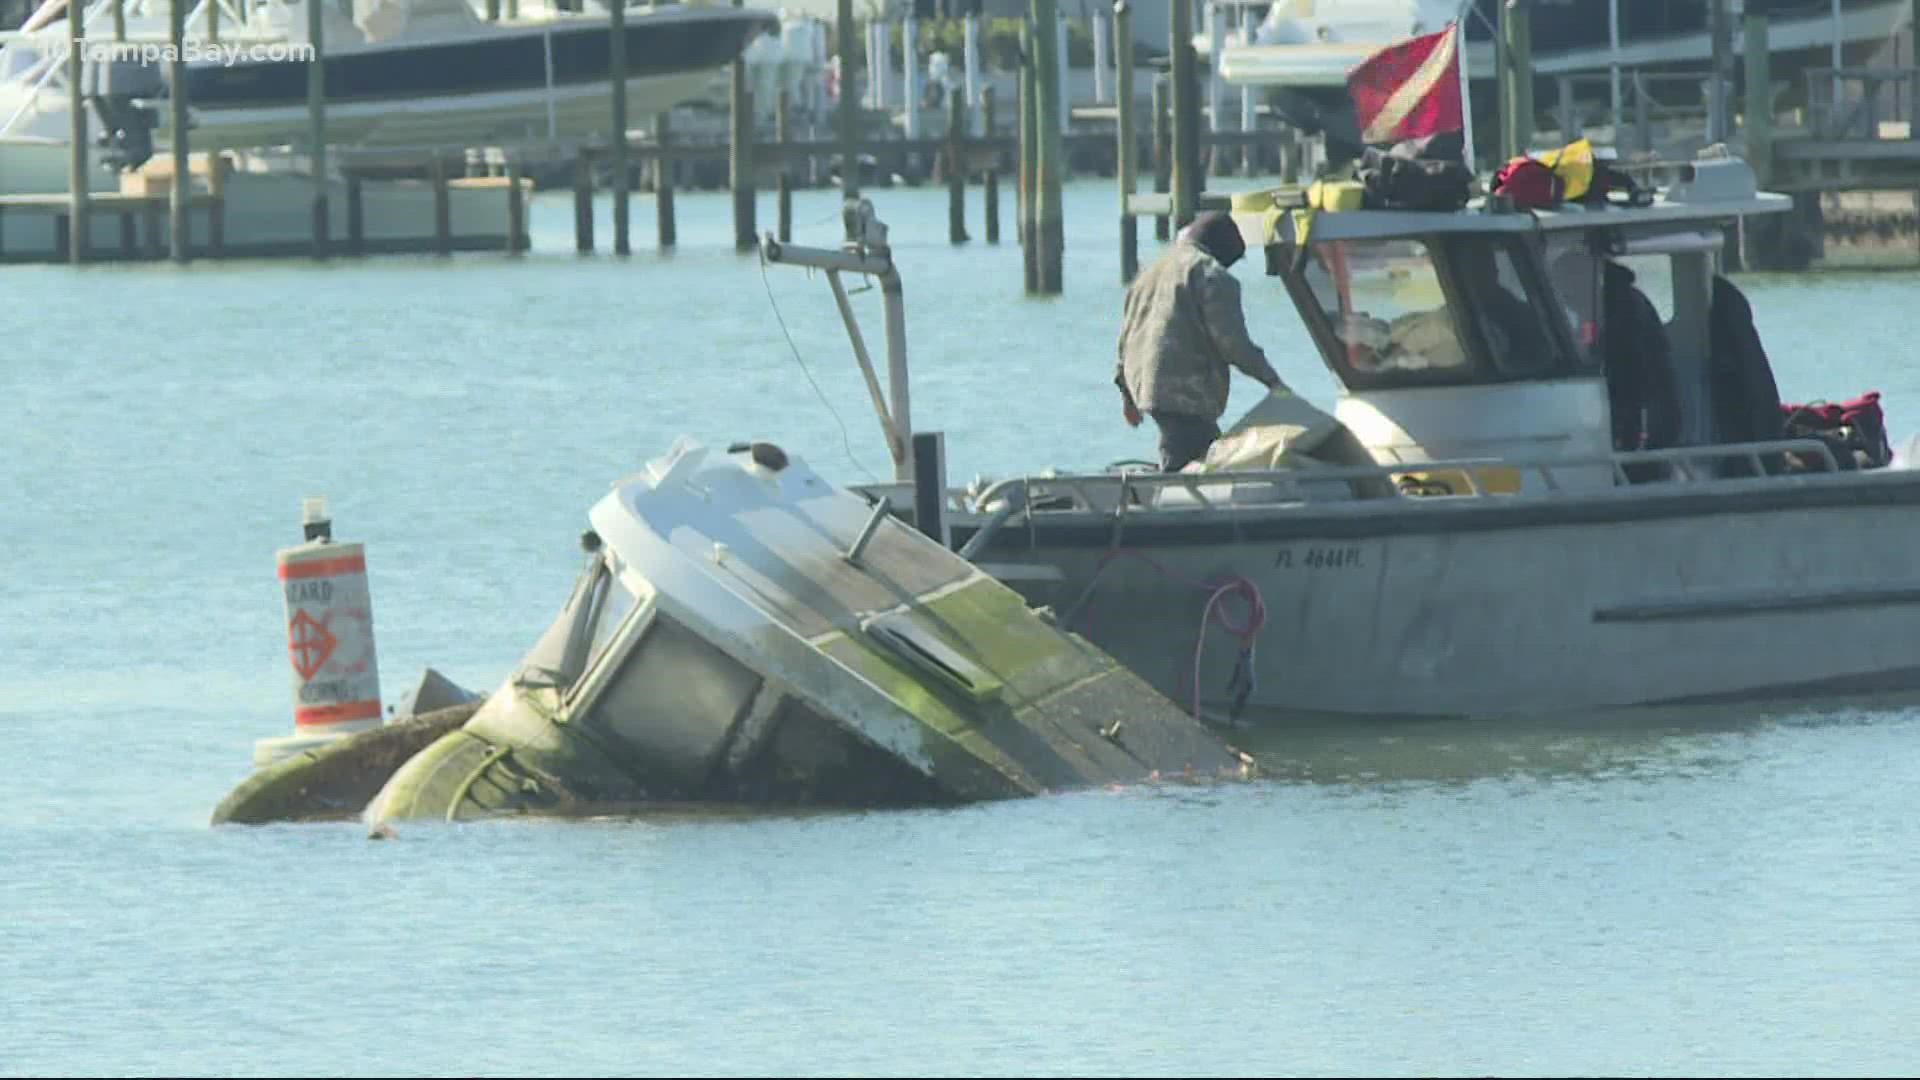 The Pinellas County Sheriff's Office is working with a company to remove derelict boats from the water.